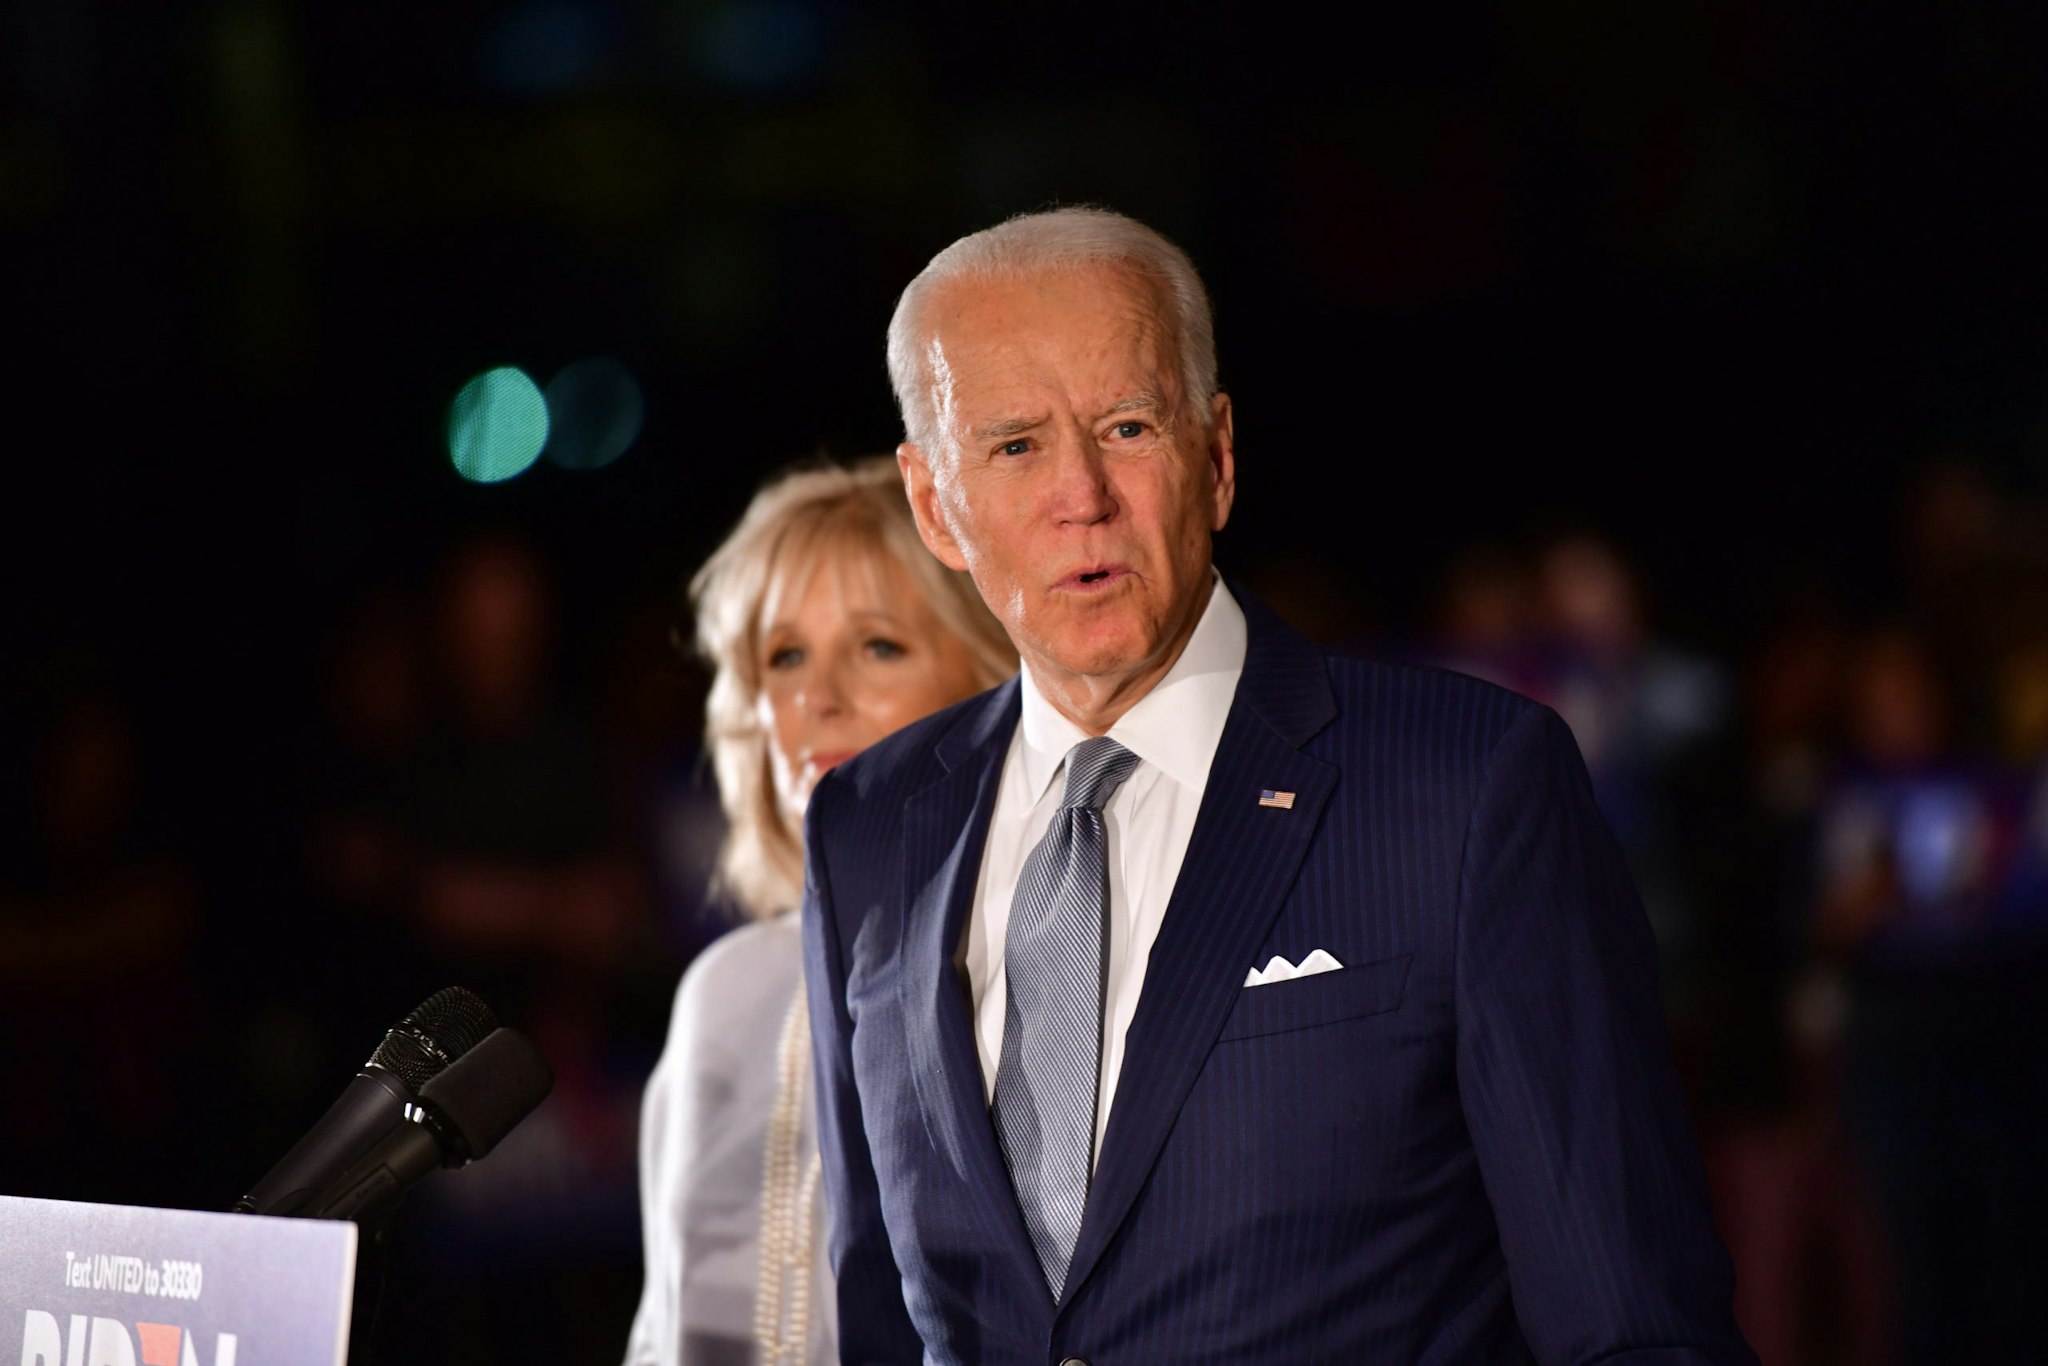 PHILADELPHIA, PA - MARCH 10: Democratic Presidential candidate former Vice President Joe Biden addresses the media and a small group of supporters with his wife Dr. Jill Biden during a primary night event on March 10, 2020 in Philadelphia, Pennsylvania. Six states - Idaho, Michigan, Mississippi, Missouri, Washington, and North Dakota held nominating contests today. (Photo by Mark Makela/Getty Images)